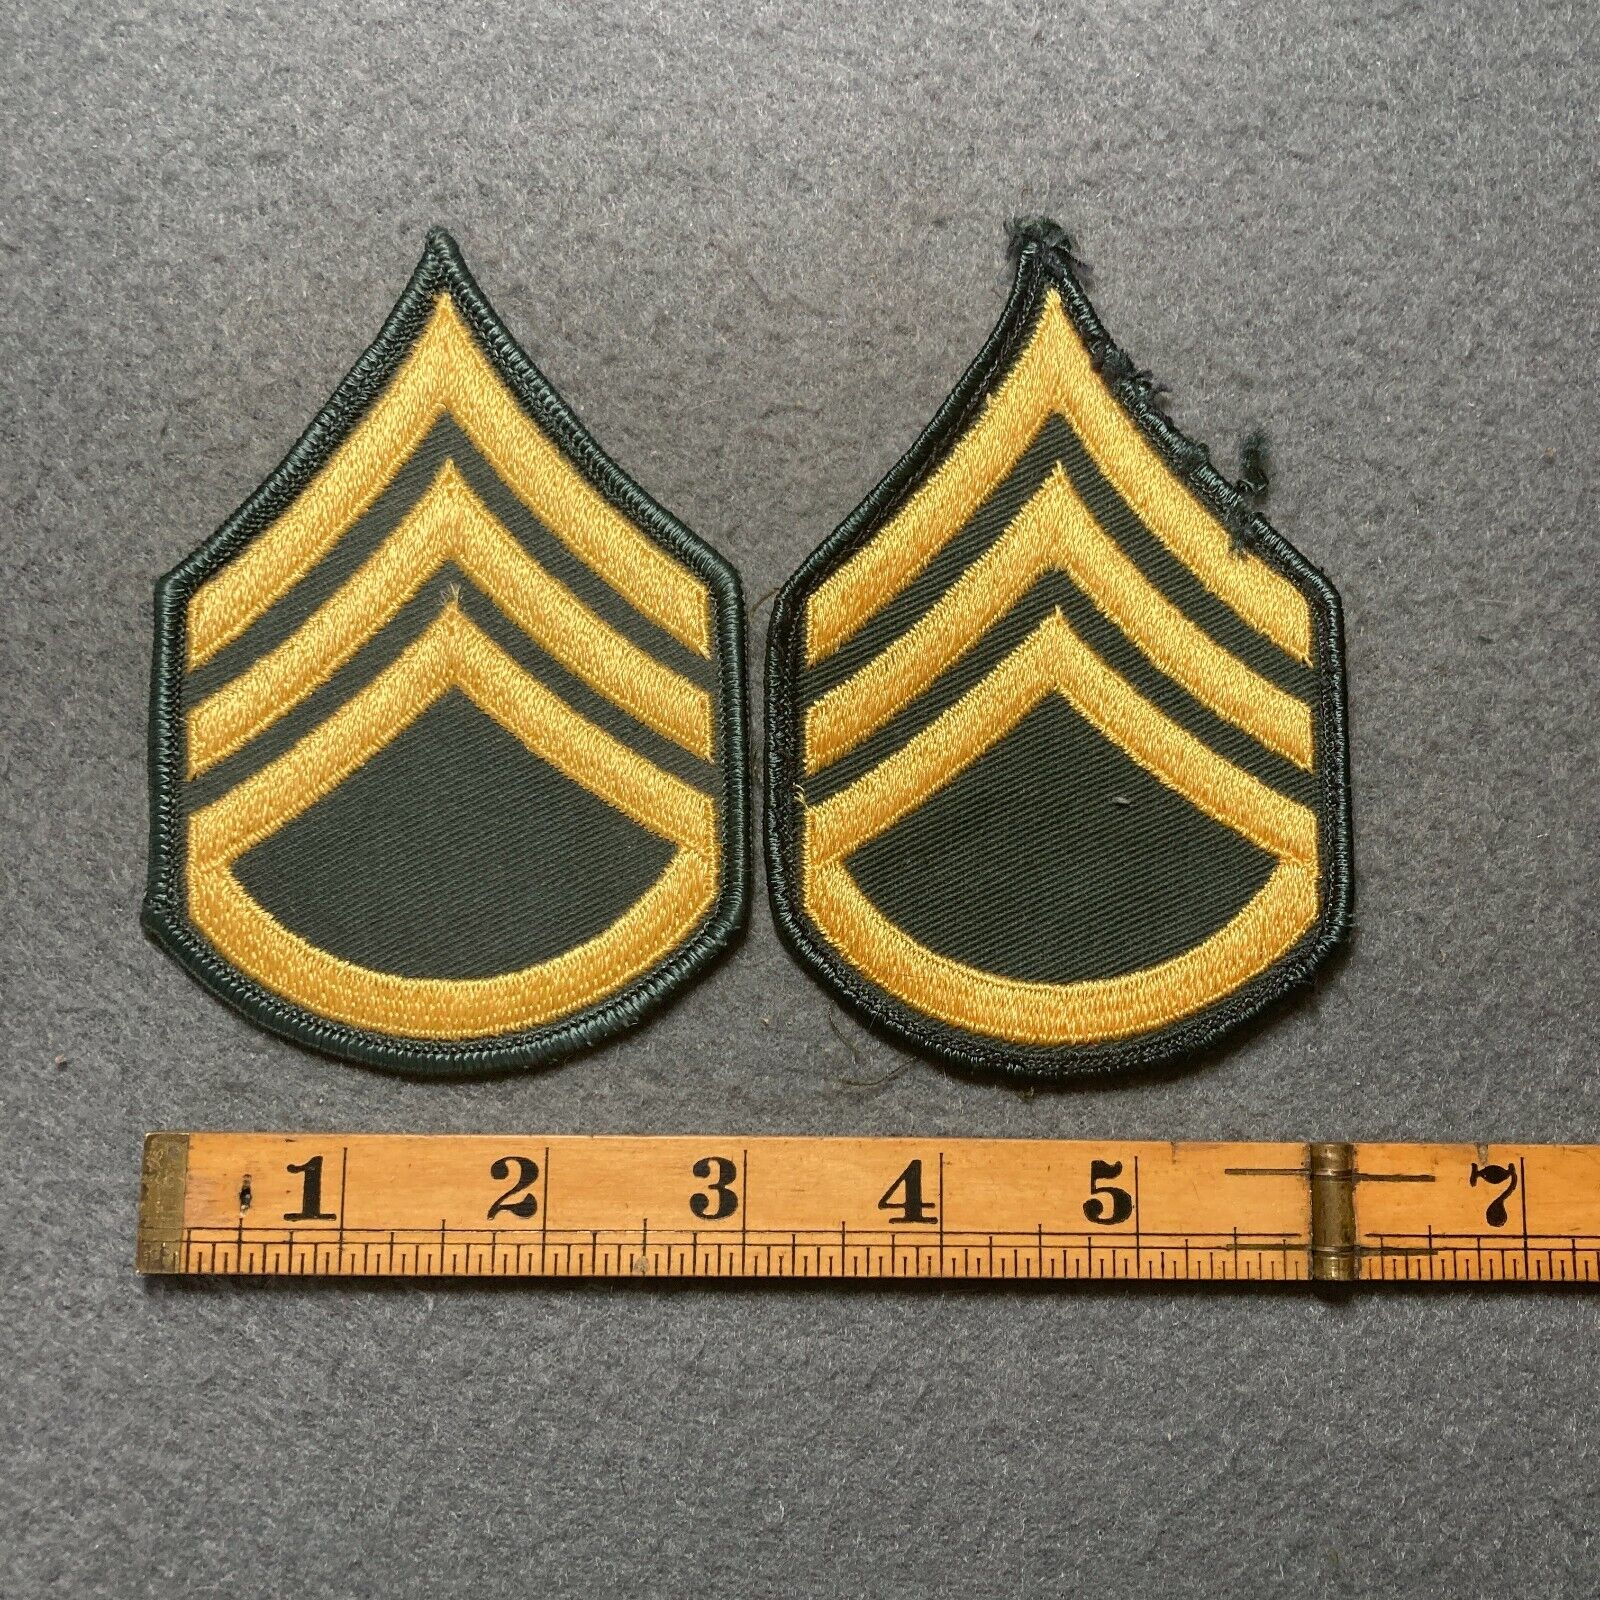 Pair Of US Army Staff Sergeant Rank Green Gold Chevron Patches M7*